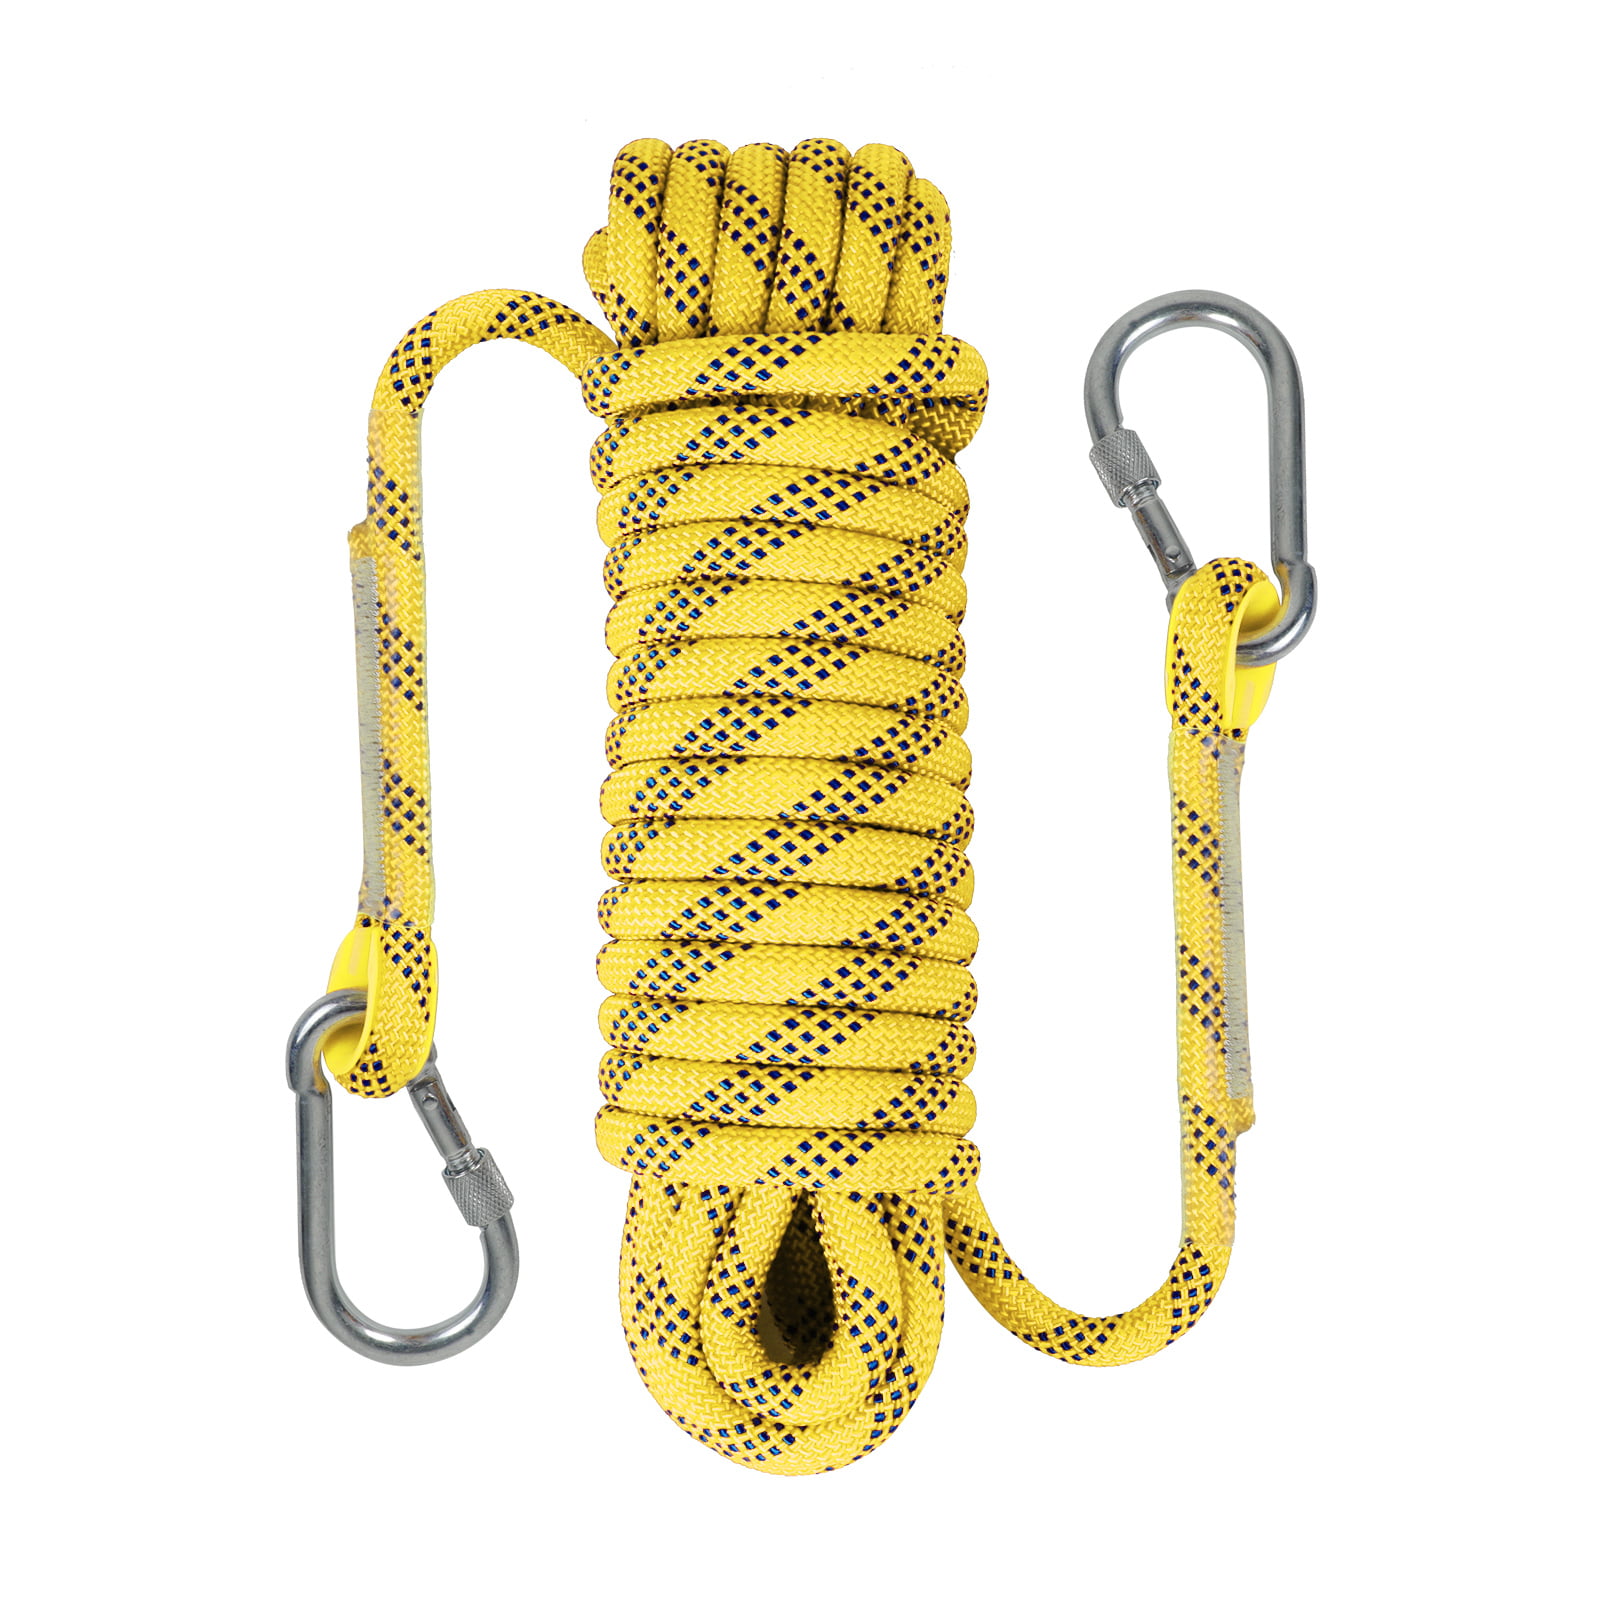 Multi Emergency Rappelling Rock Climbing Rope Strap Outdoor Auxiliary Cord Kit 